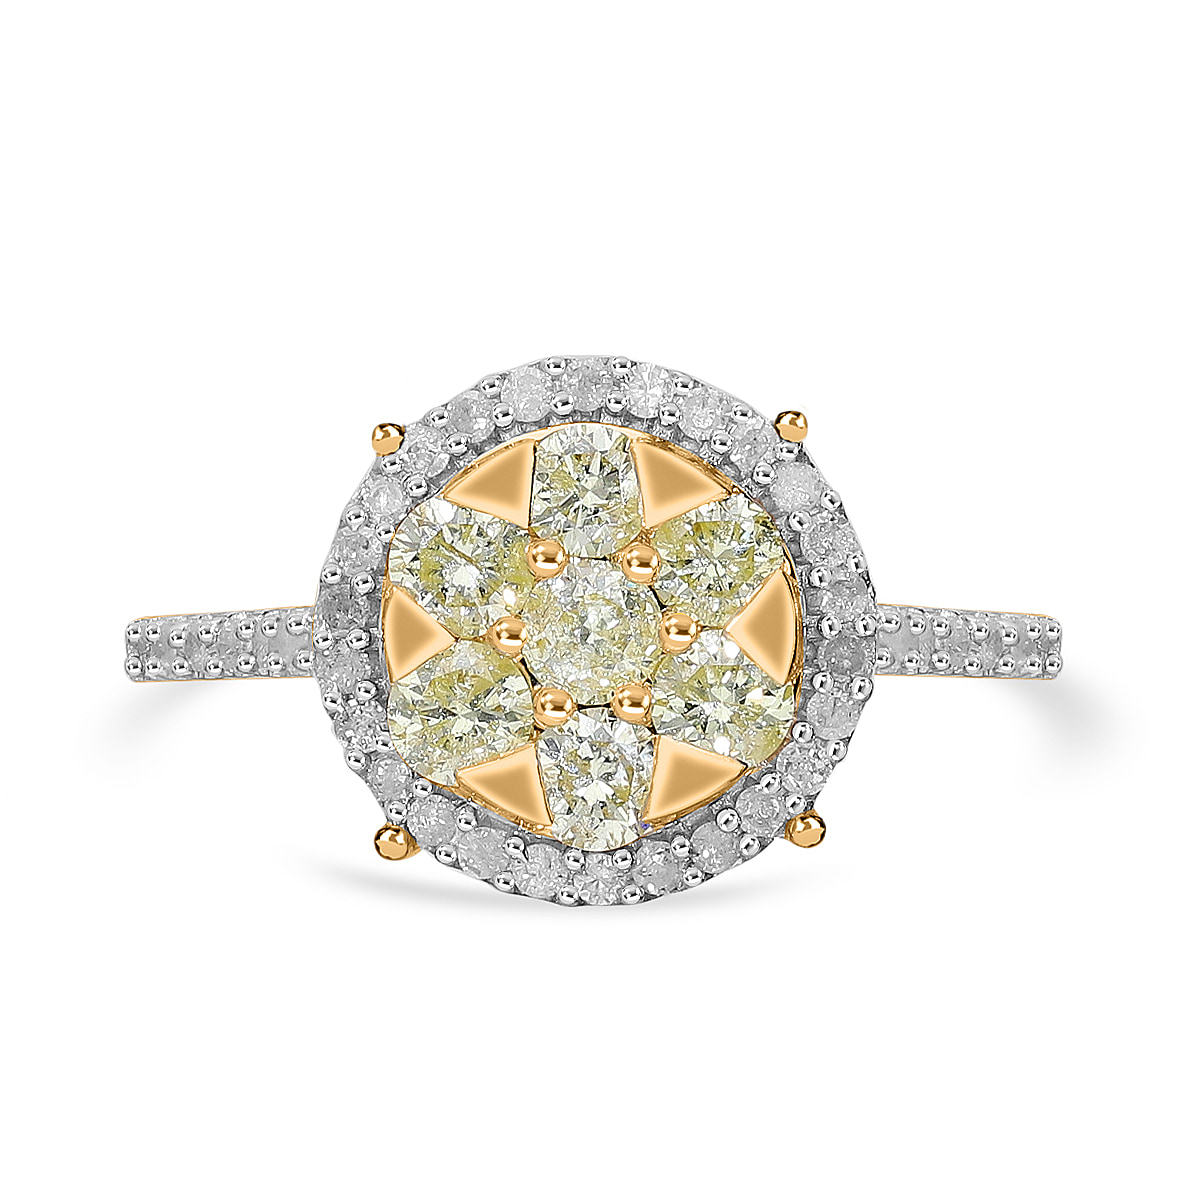 The Rare Find - Yellow Diamond Ring in 9K Yellow Gold with White Diamonds  (1.00 CT)- Limited Stock